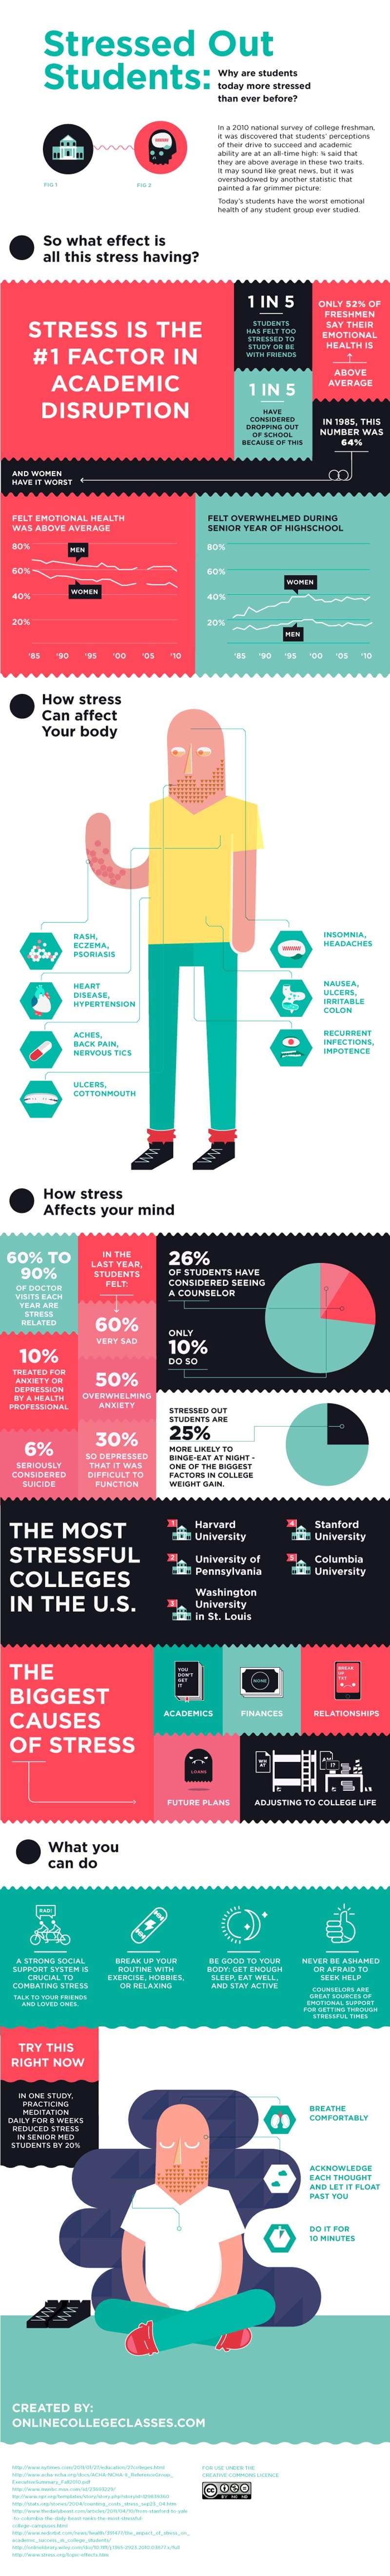 Stressed Out Students [Infographic]